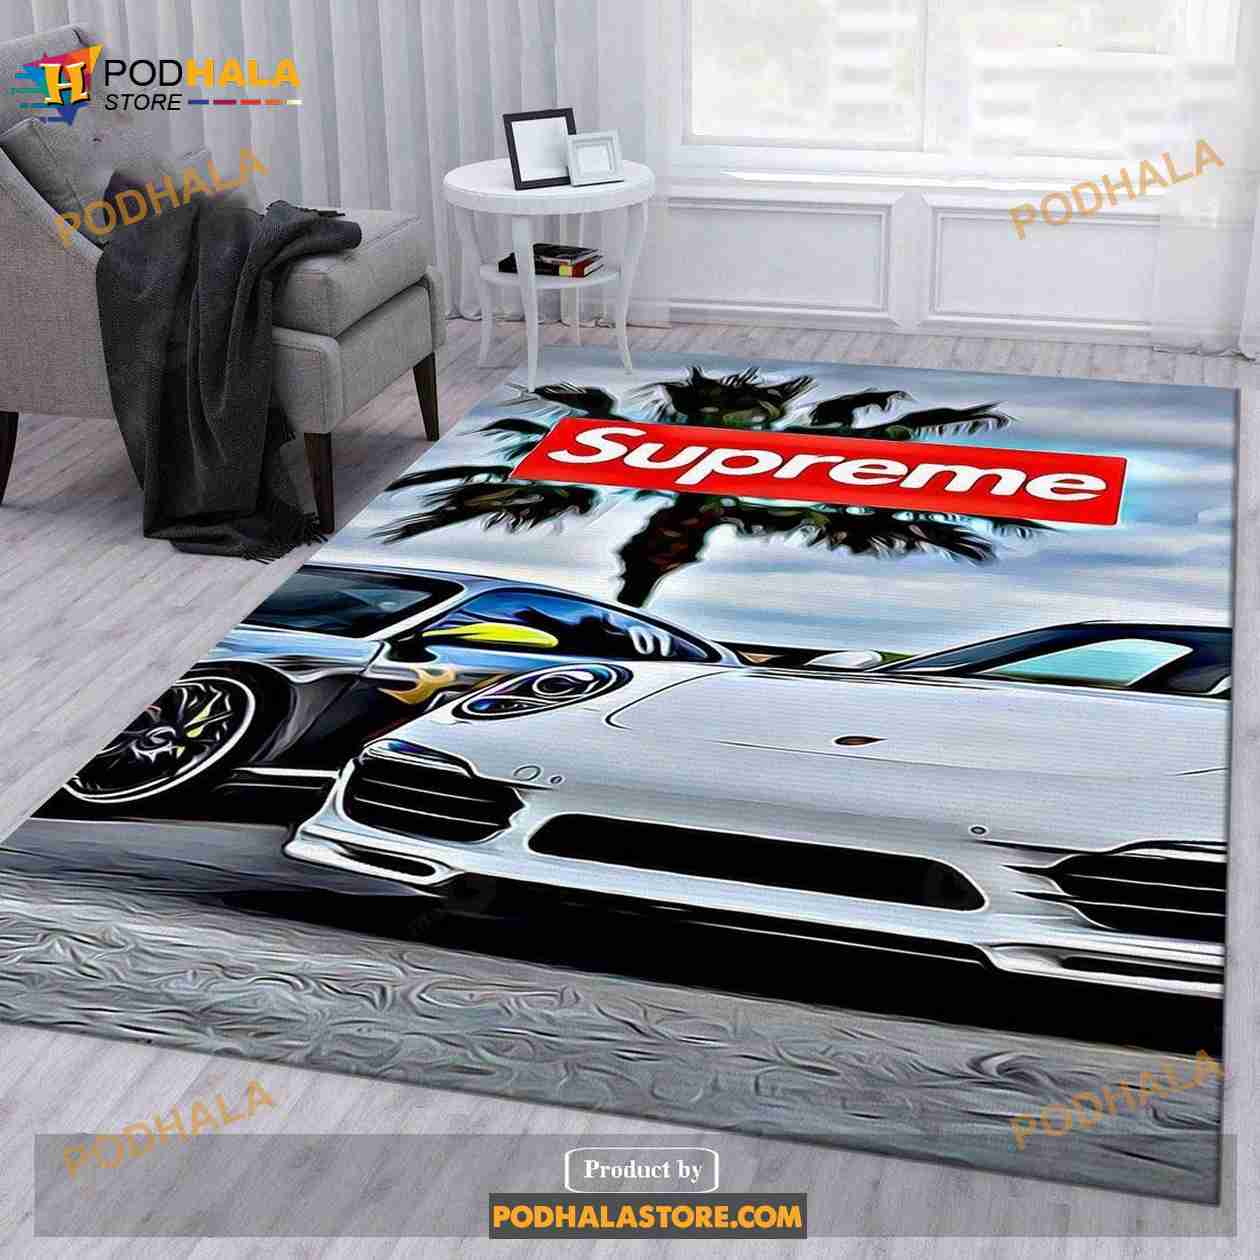 Supreme Lamborghini V11 Area Rug Living Room Rug Home Us Decor - Bring Your  Ideas, Thoughts And Imaginations Into Reality Today